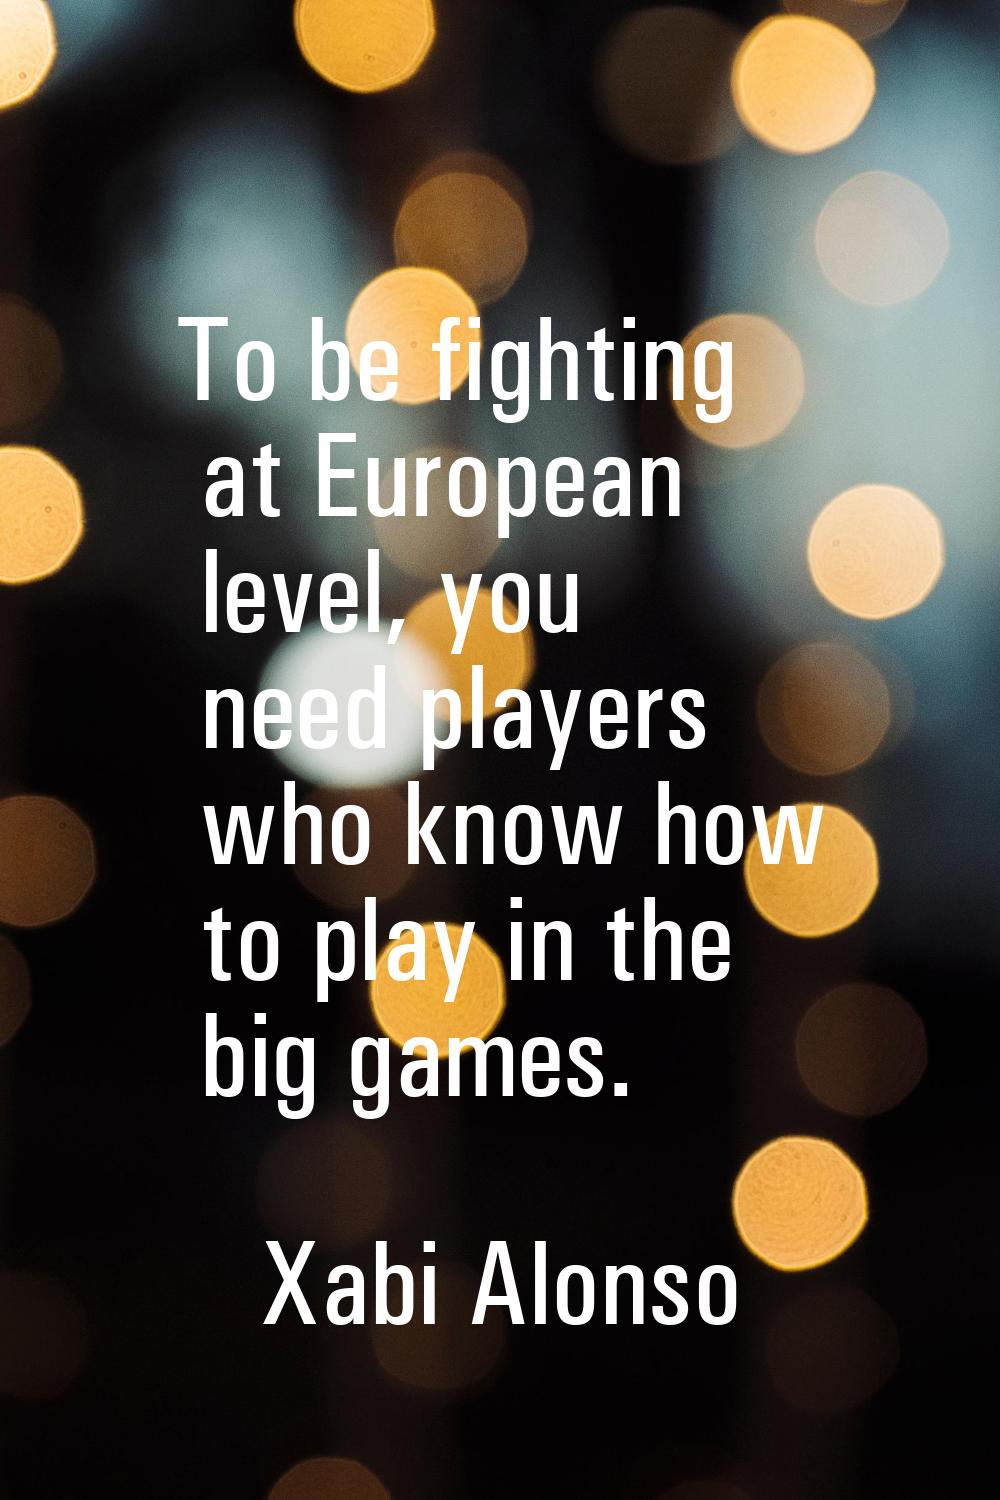 To be fighting at European level, you need players who know how to play in the big games.